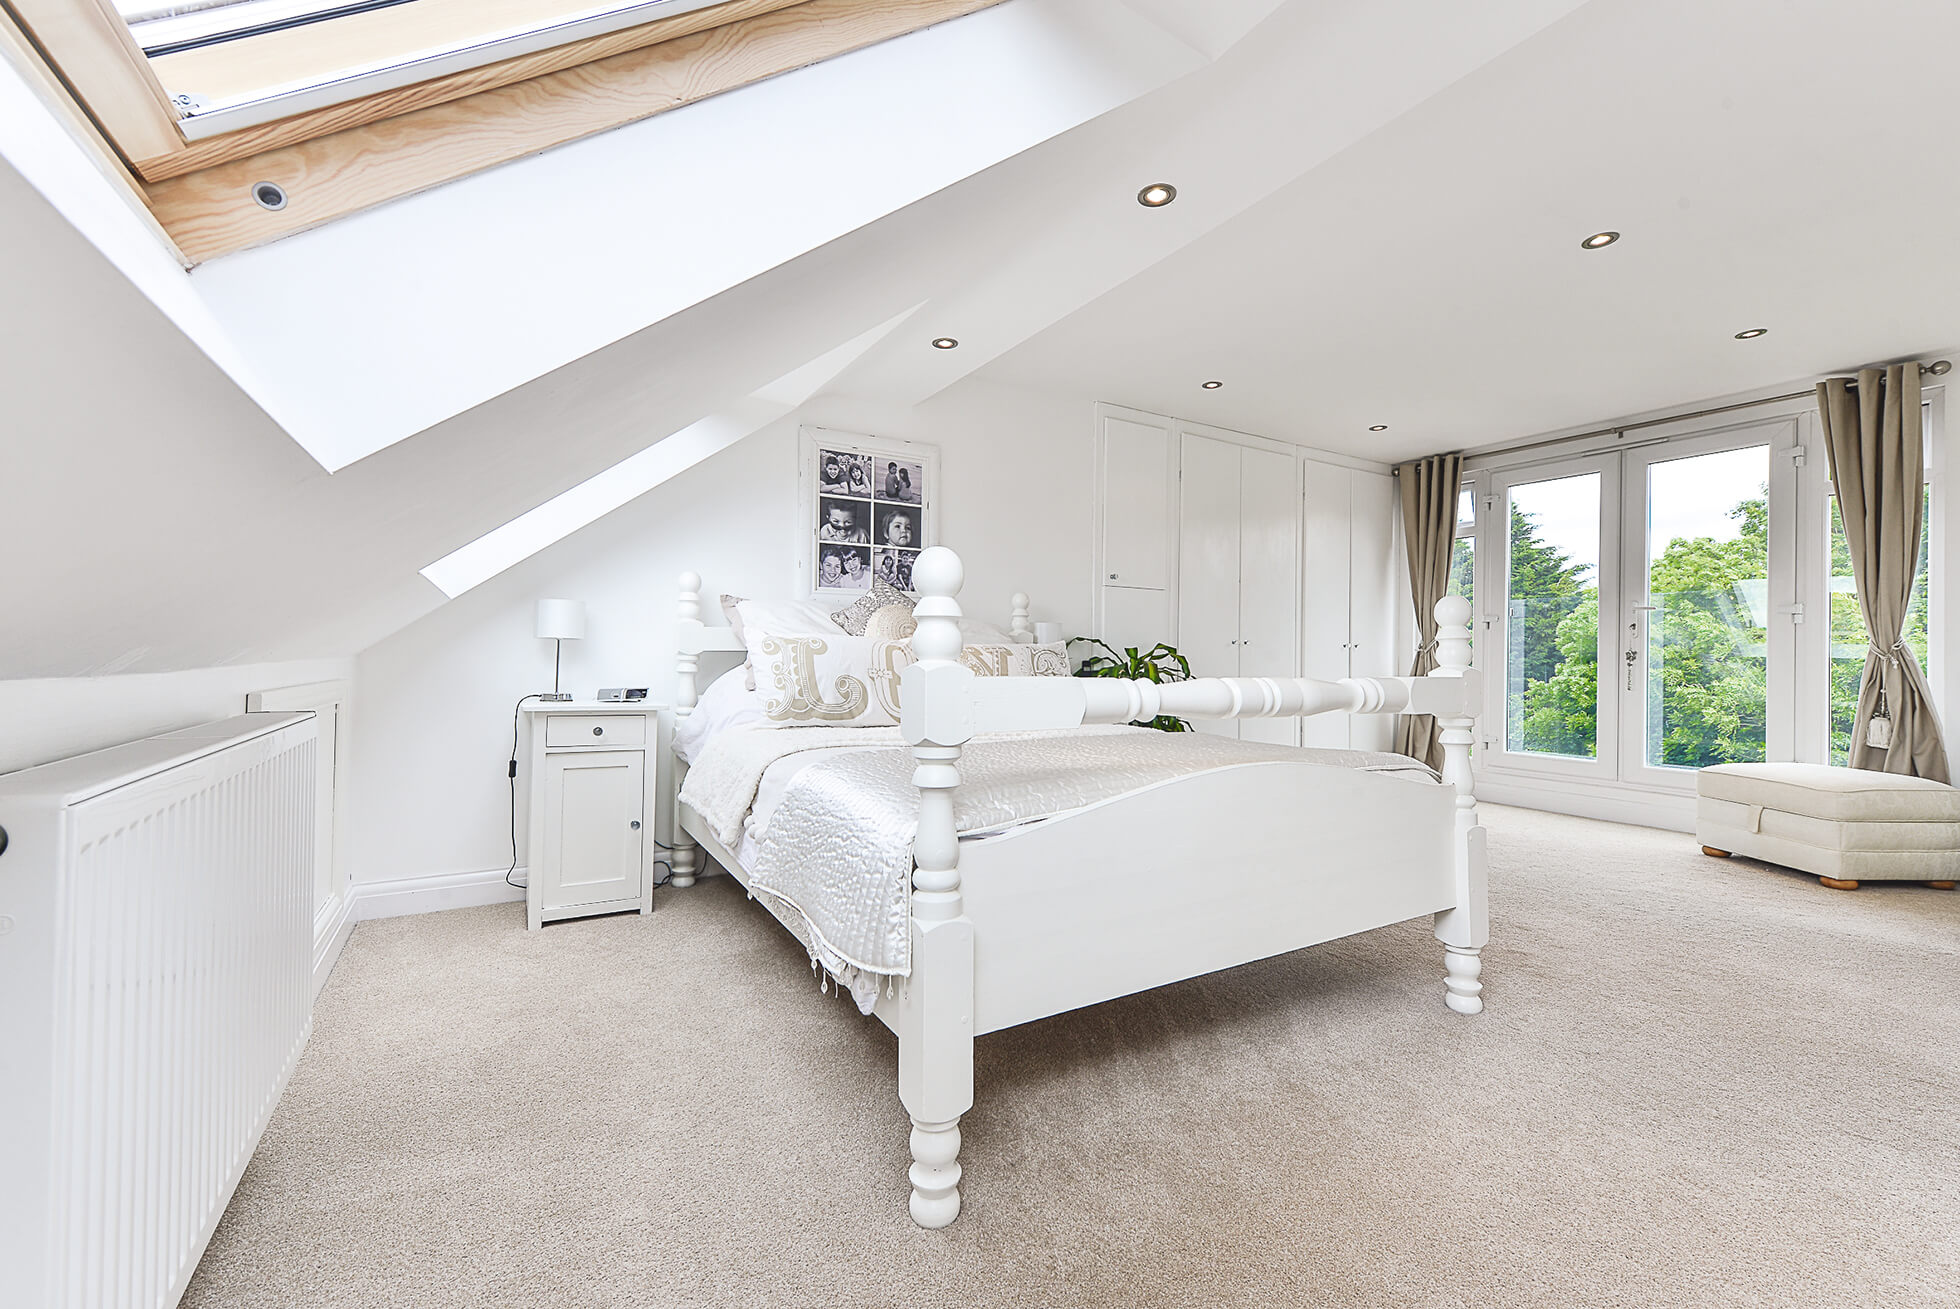 Do you have a question about converting your Loft in Buntingford? Here are the most popular questions asked by our clients.